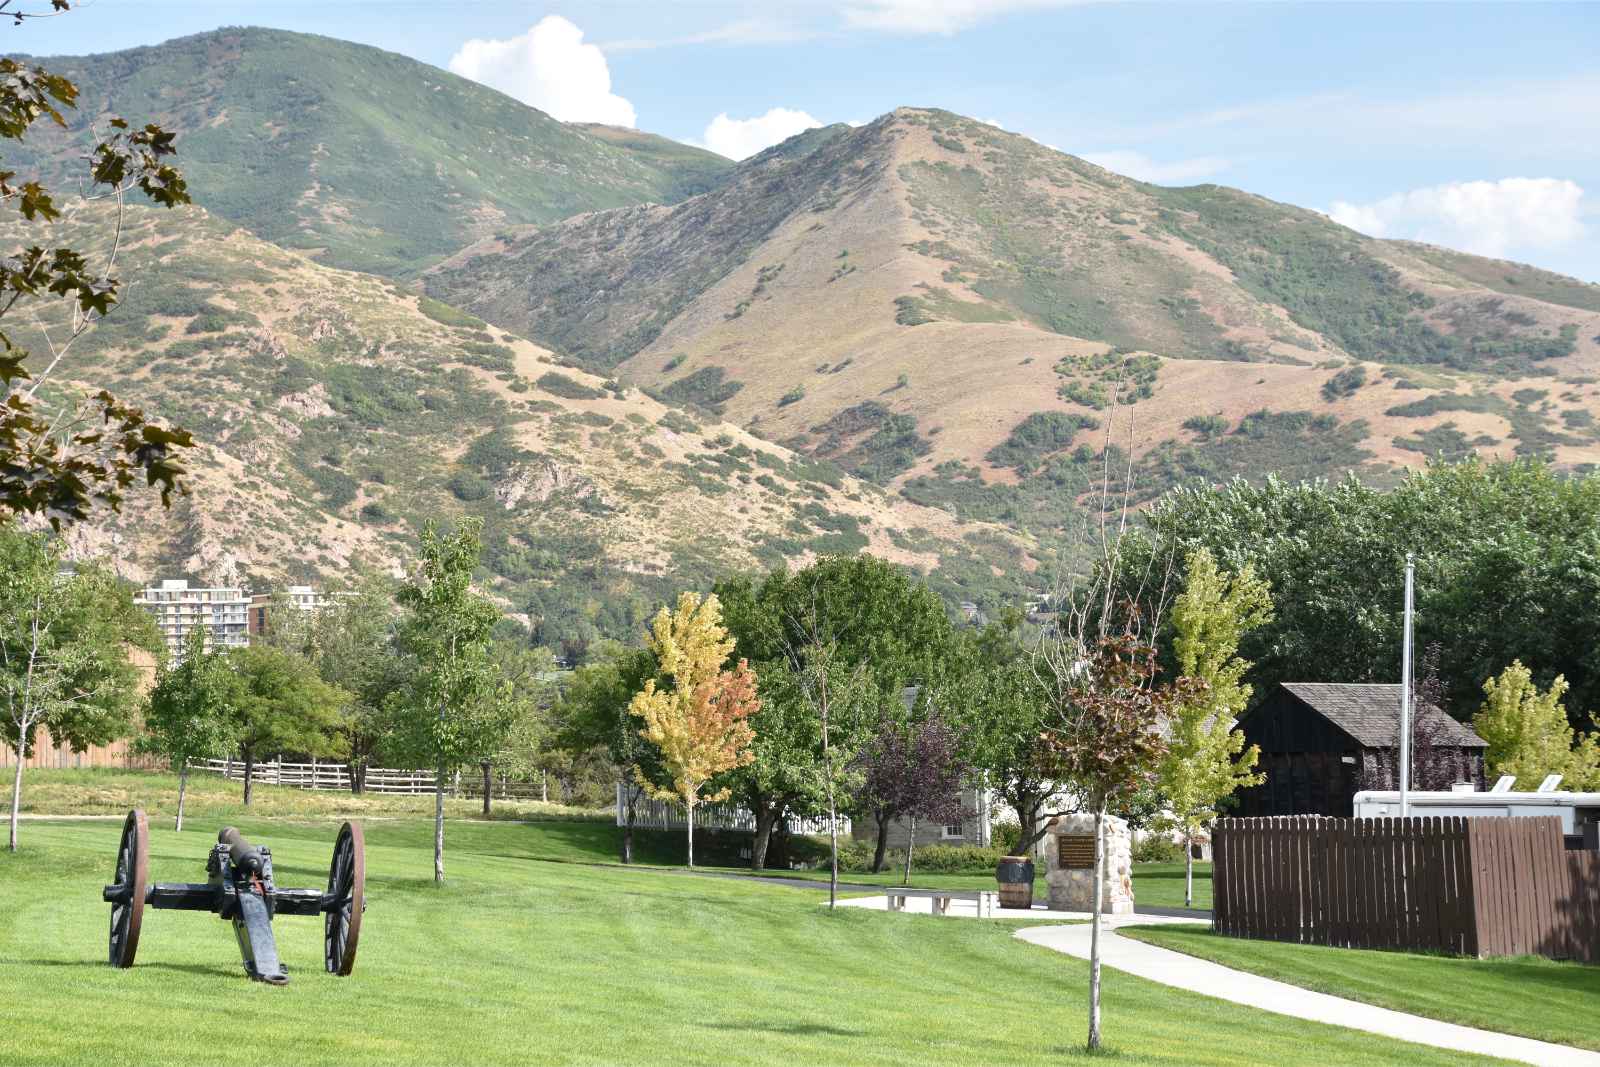 Things to do in Salt Lake City - Place Heritage Park